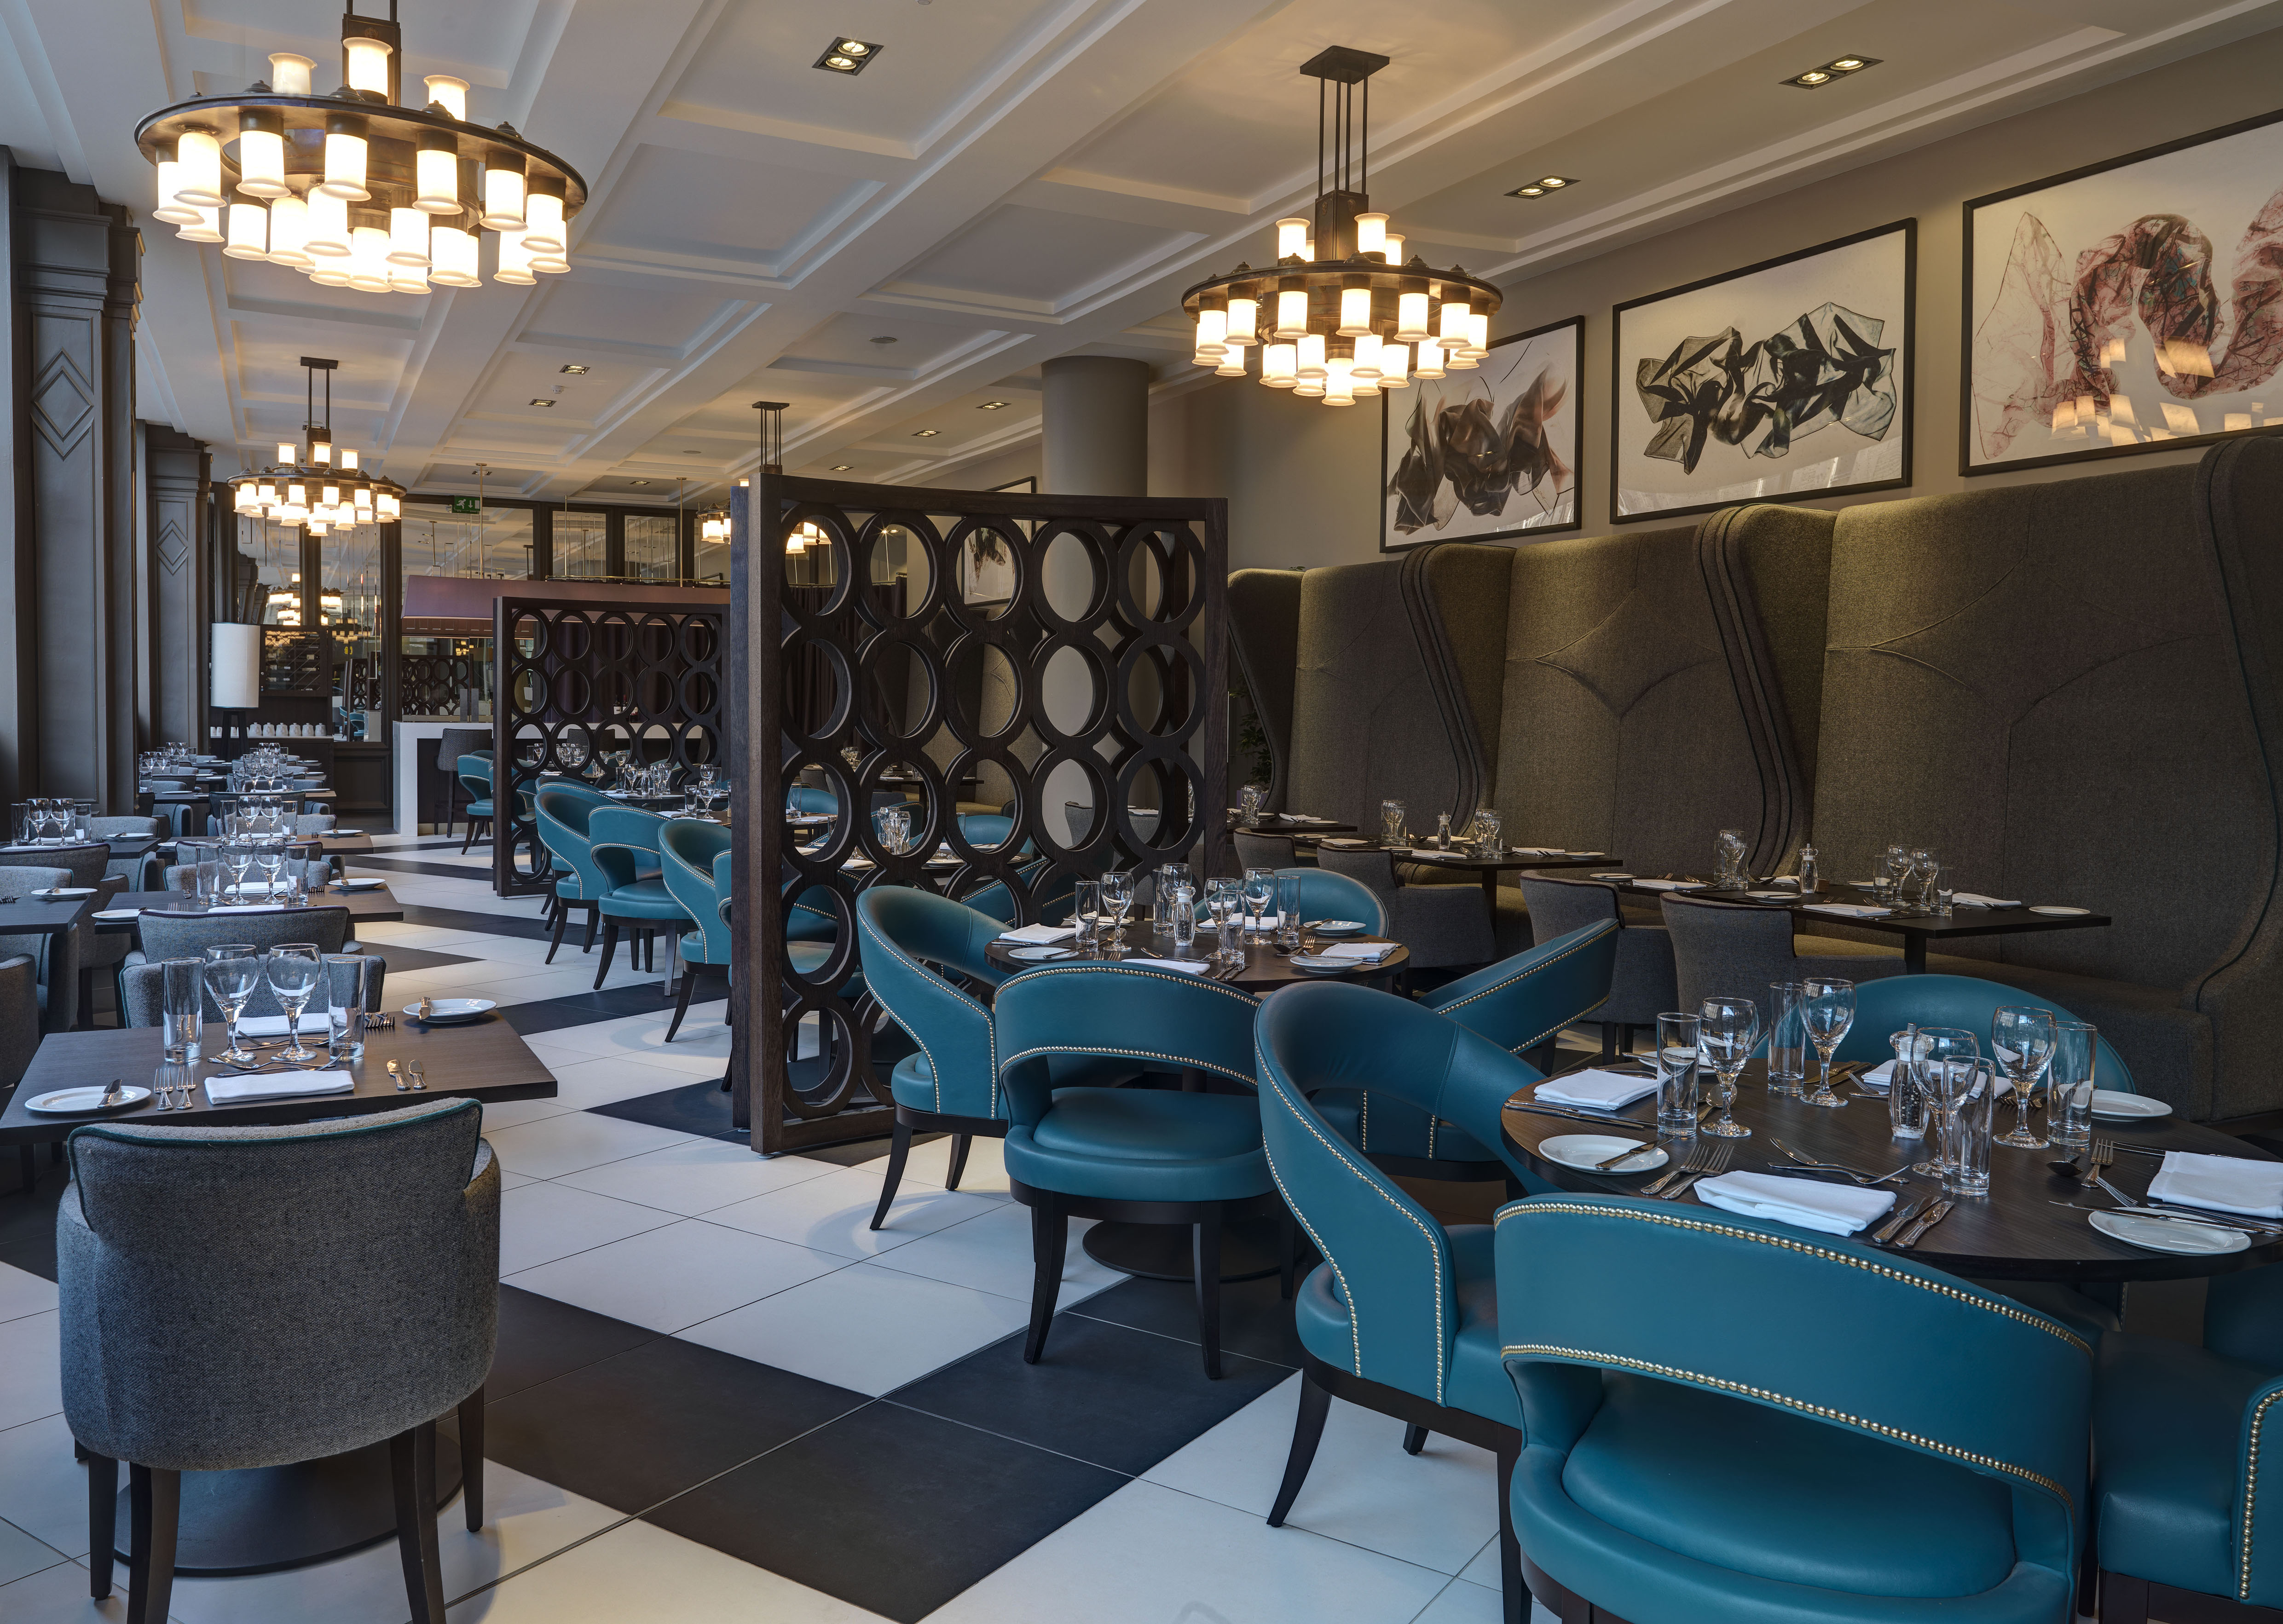 Wall Art, Booths, Chairs and Dining Tables With Place Settings and Glasses in Bread Street Brasserie Restaurant